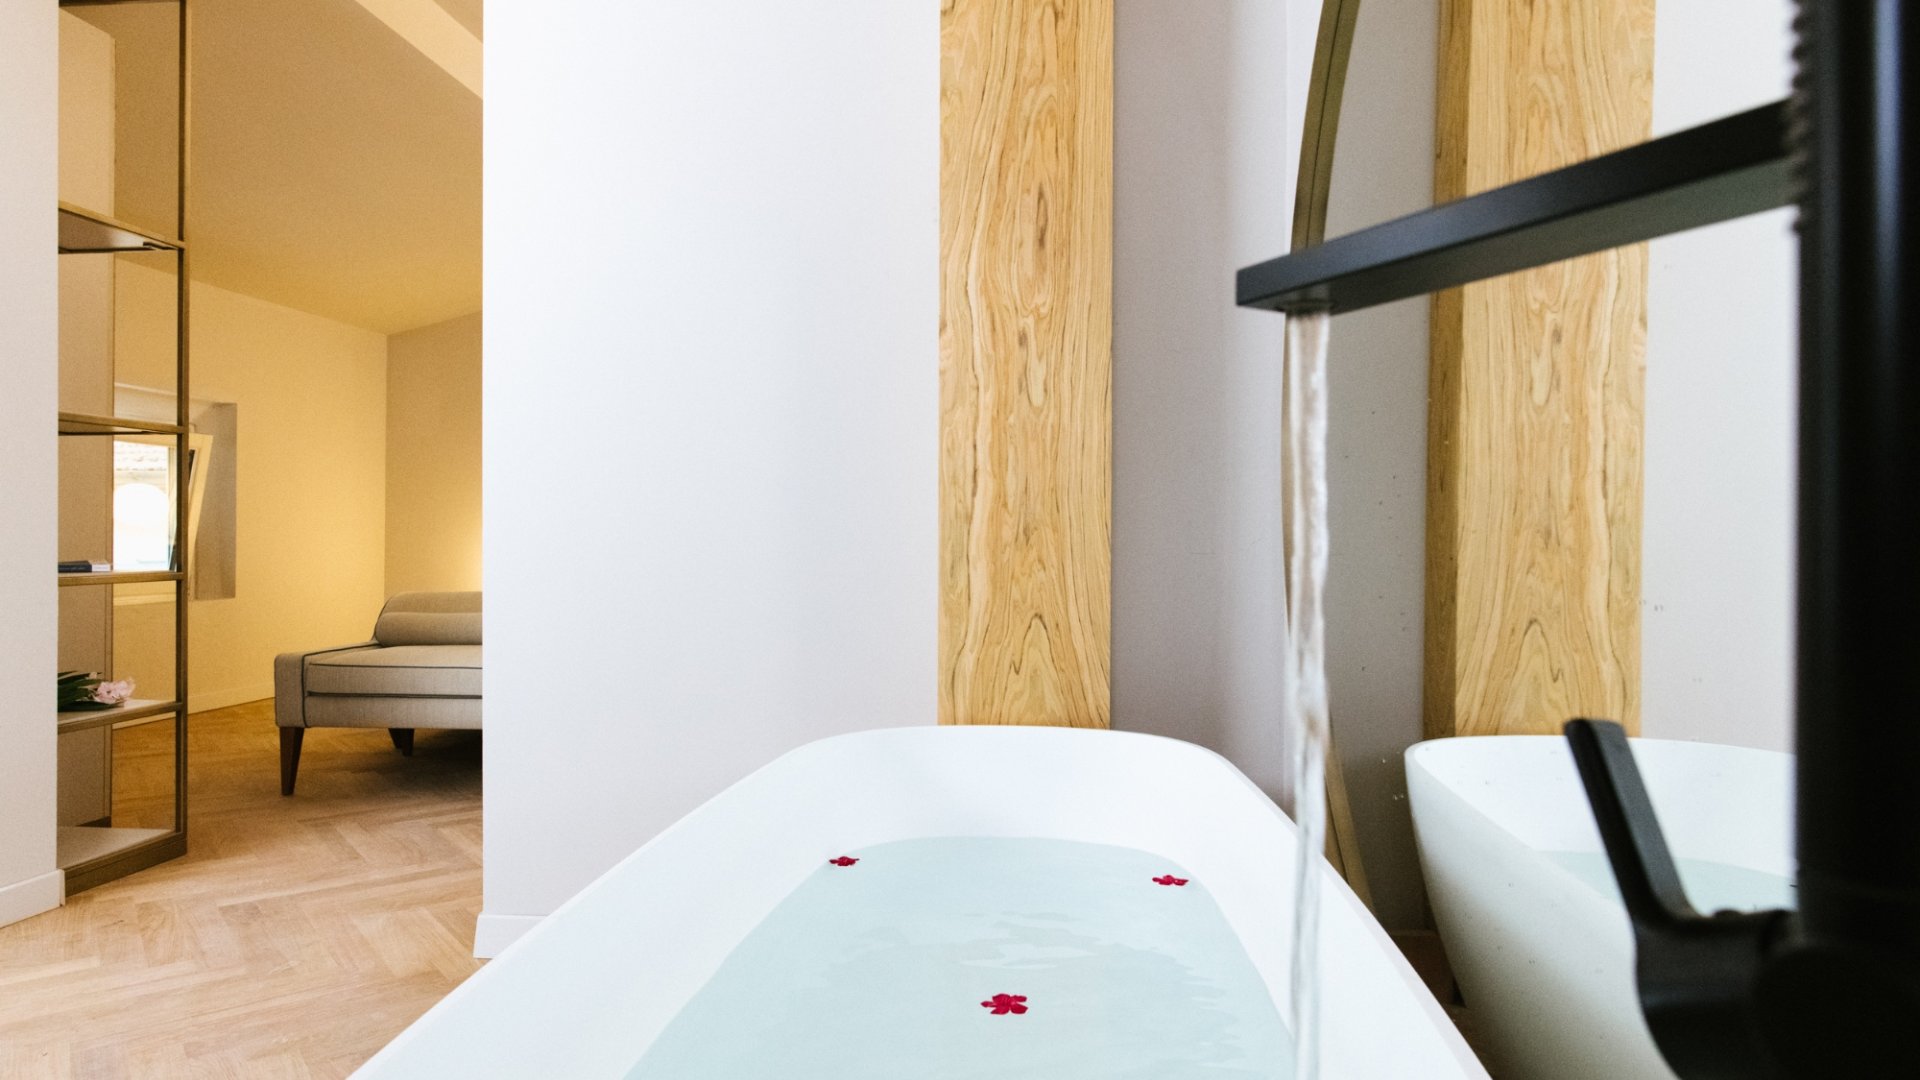 The path proposed by Palazzo BelVedere offers a stay of relaxation and well-being in Tuscany.